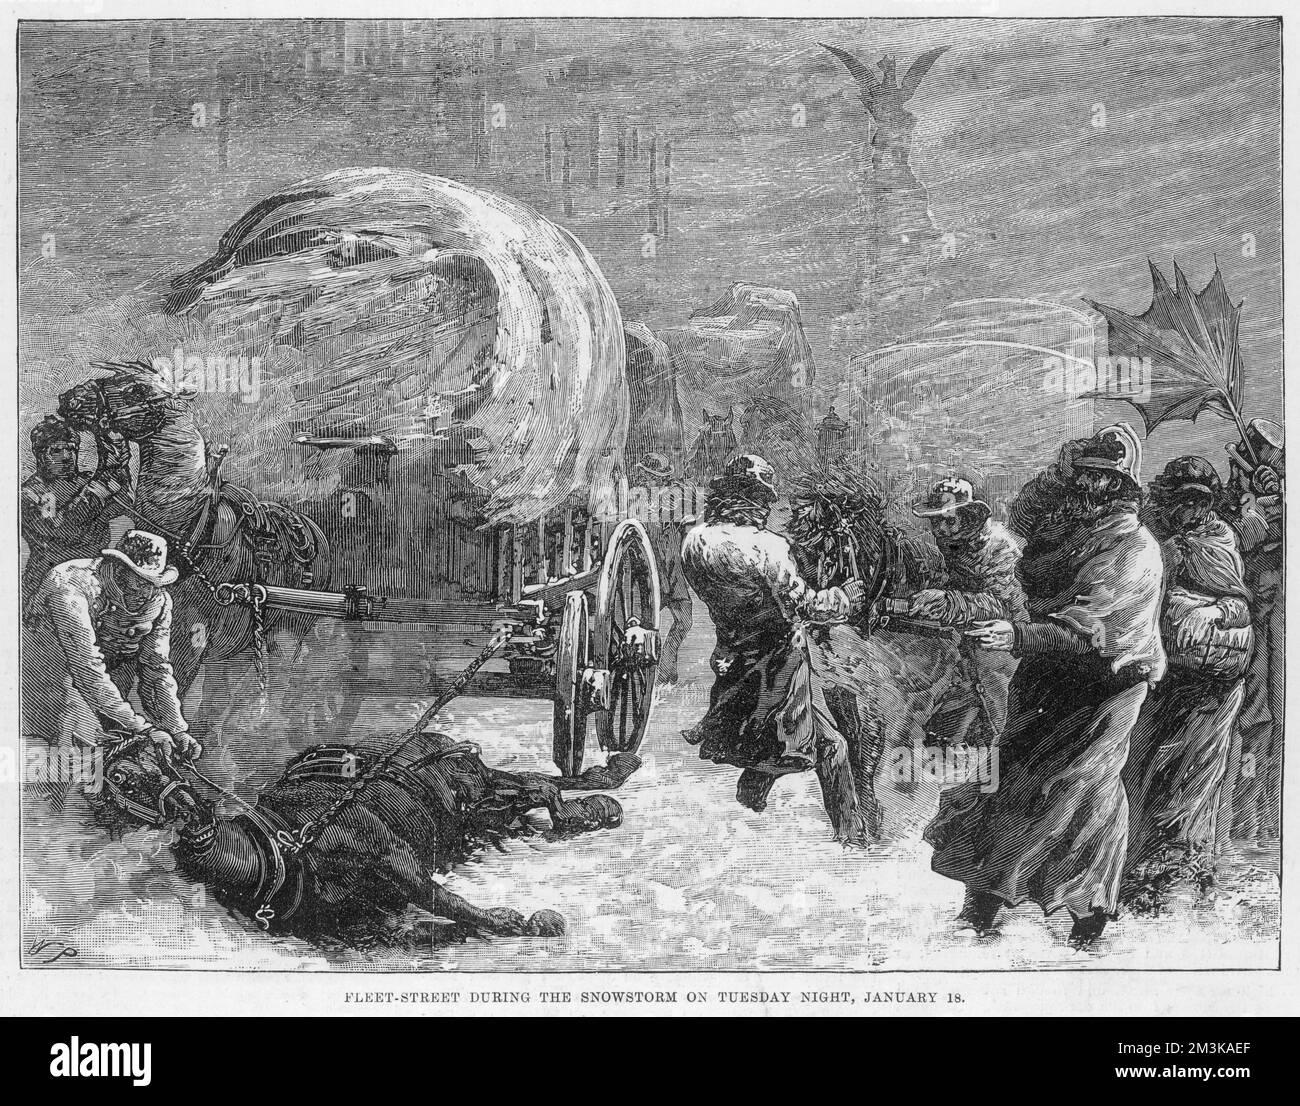 Fleet Street during the snowstorm of Tuesday night of January 18th 1881 showing horses and coaches trapped in the snow.      Date: January 1881 Stock Photo